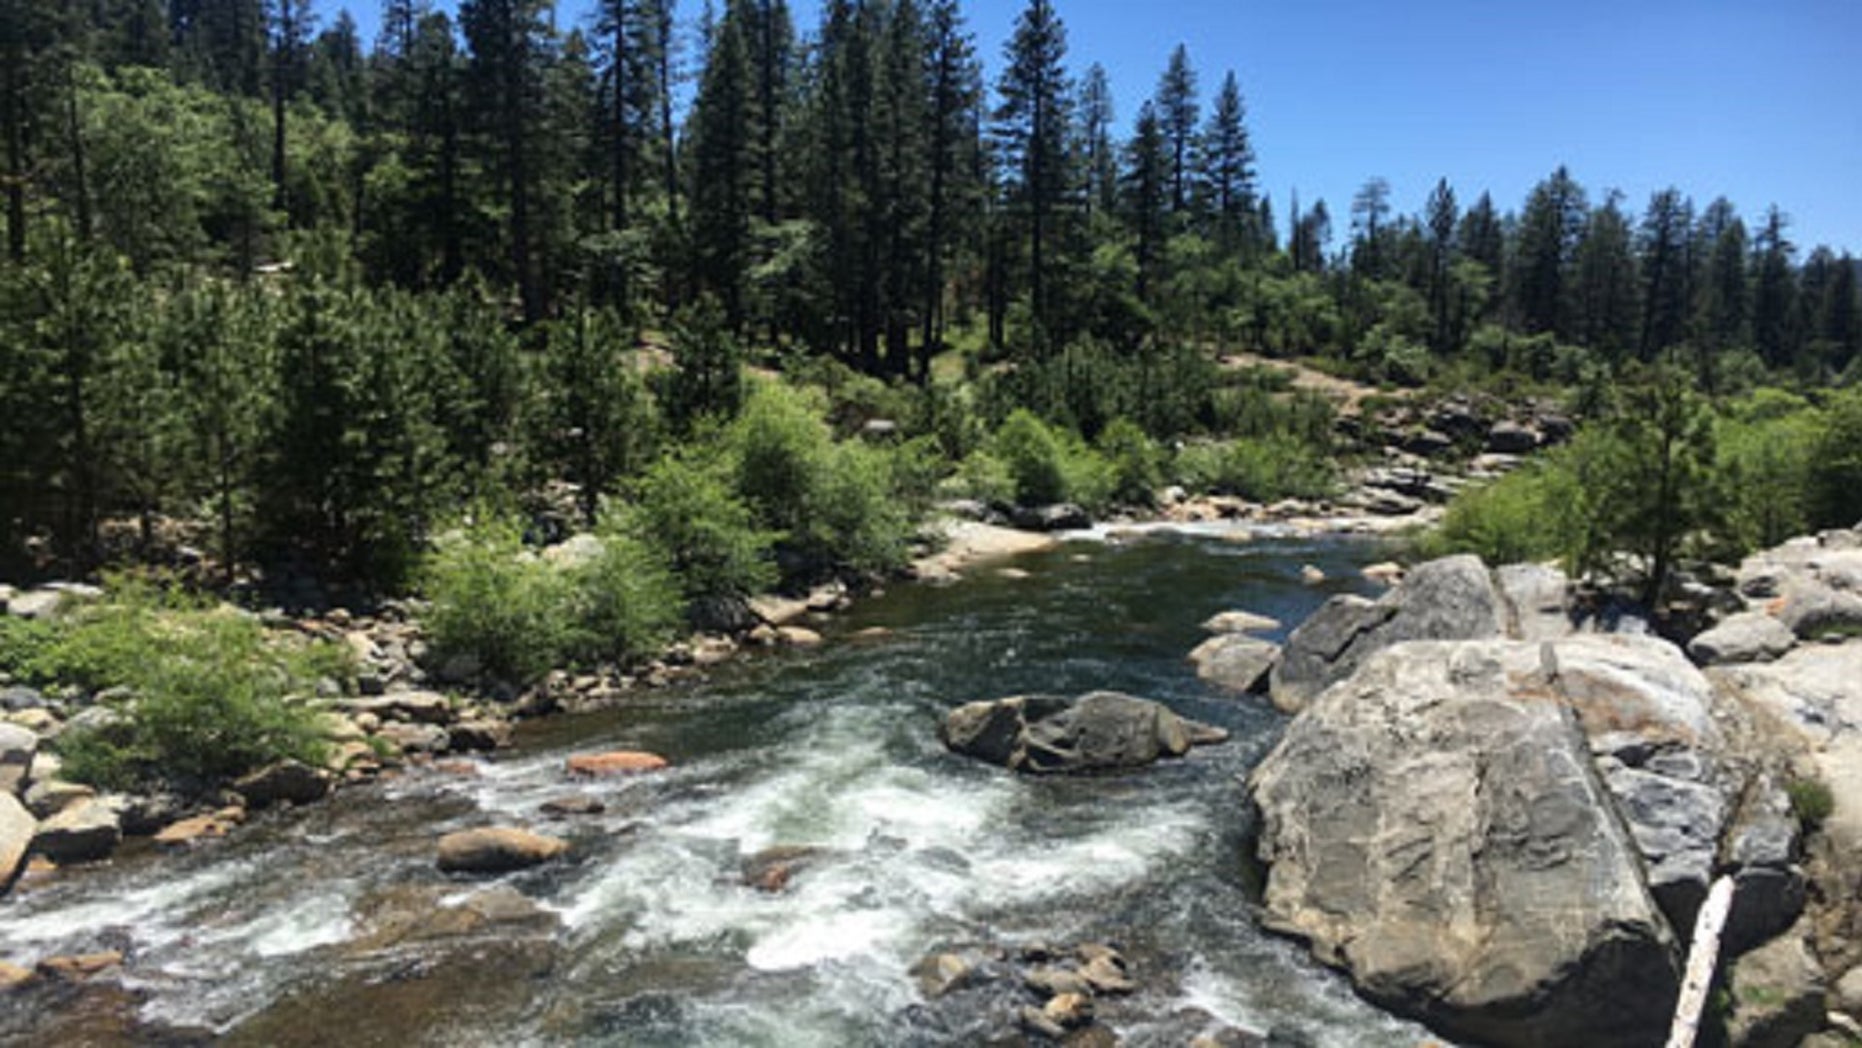 A 5-year-old girl, identified as Matilda Ortiz, slipped a few rocks and fell into the Stanislaus River in northern California on Sunday afternoon, officials said.